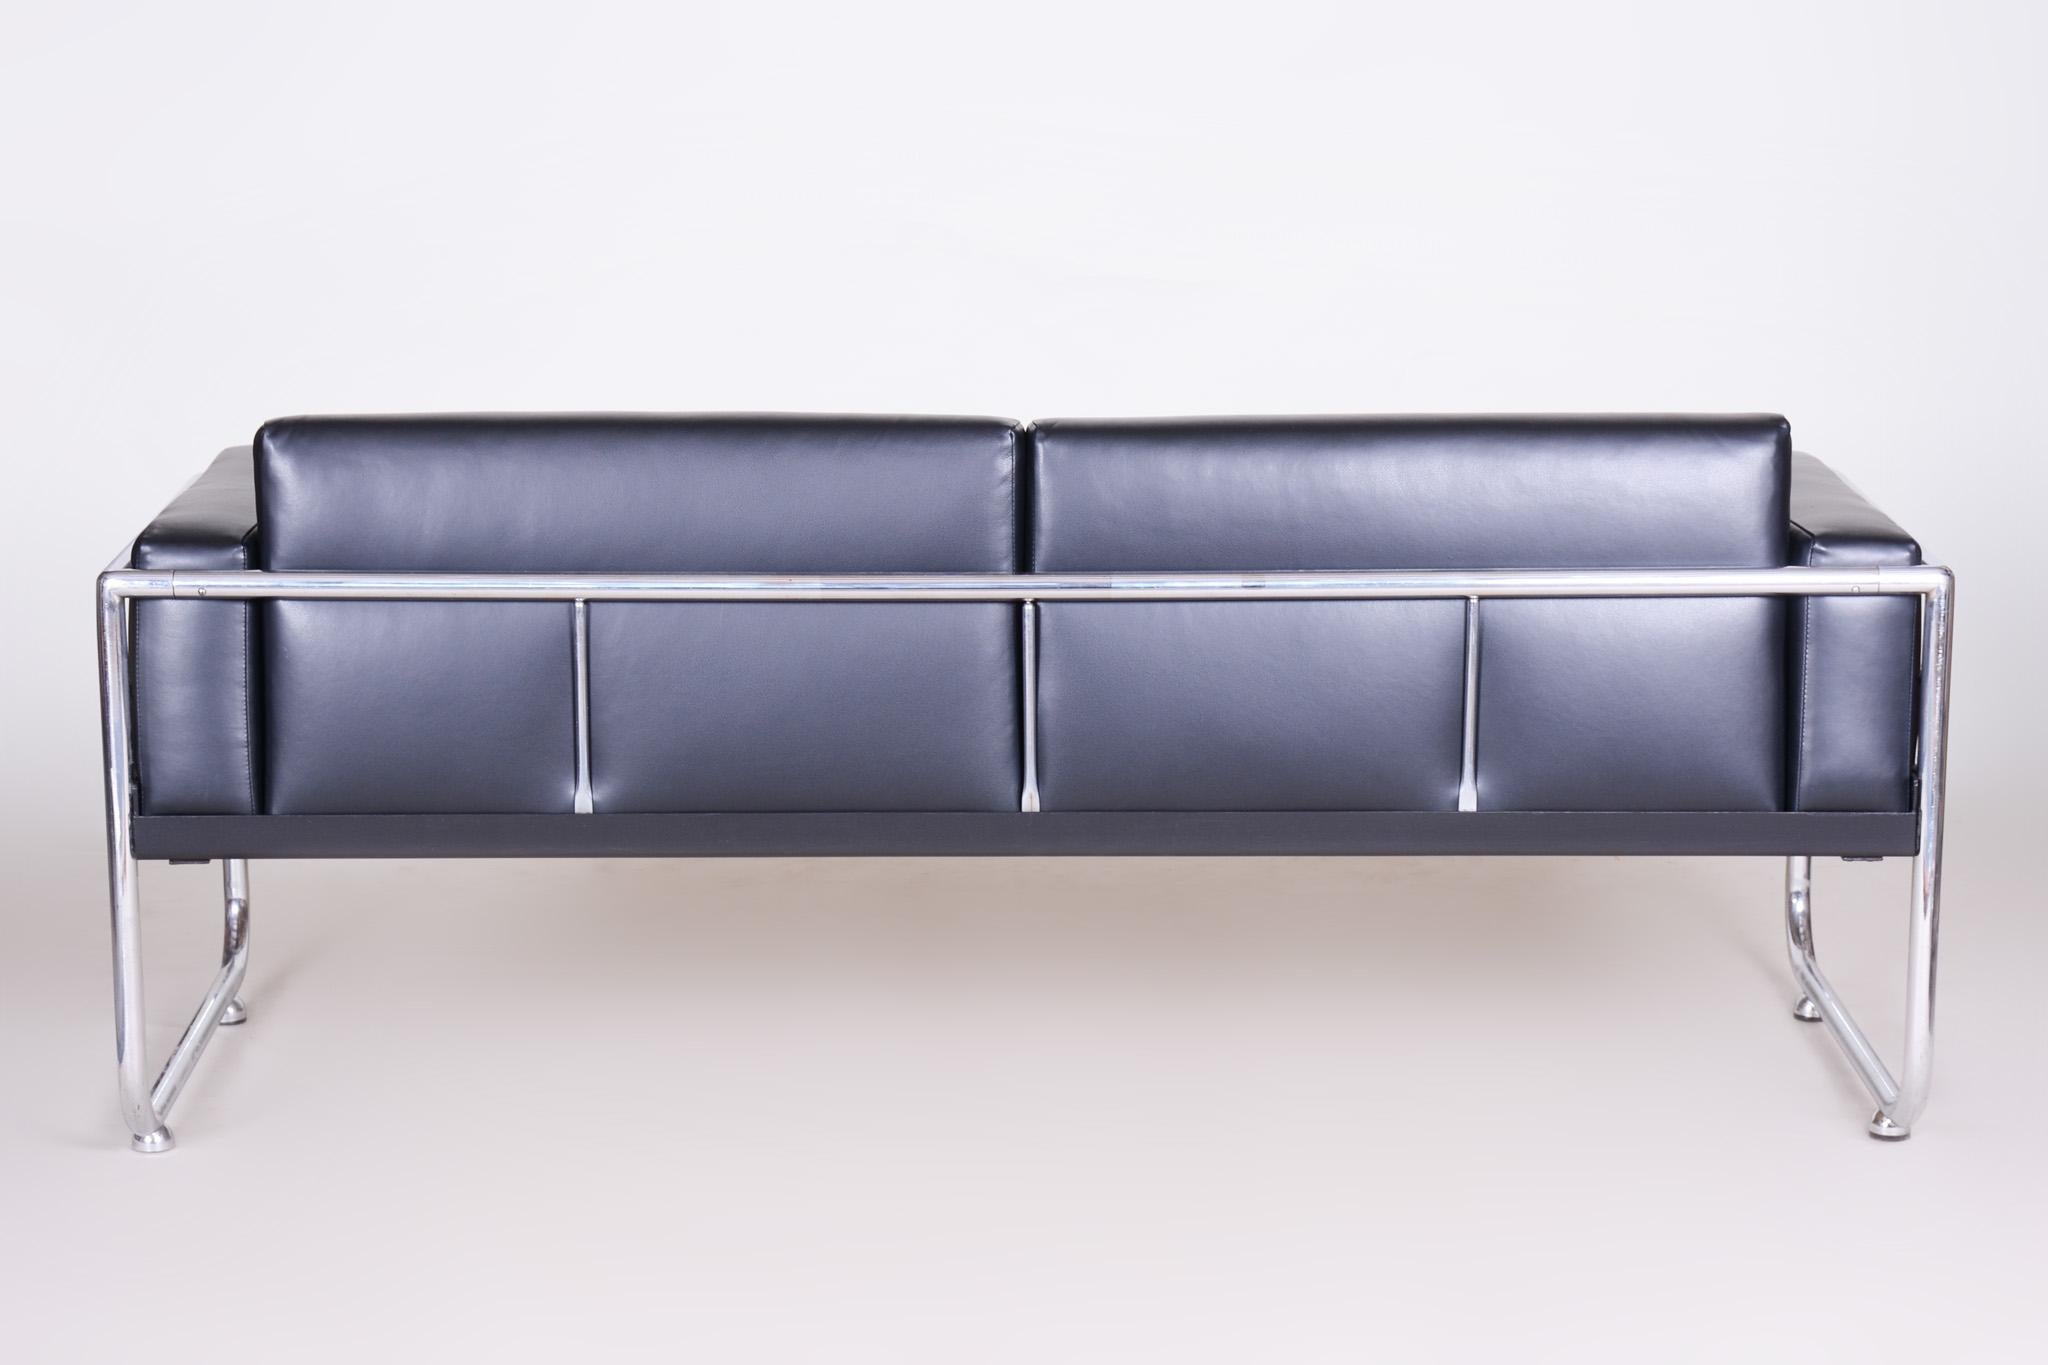 Fully Restored Bauhaus Leather and Chrome Sofa by Vichr a Spol, 1930s Czechia For Sale 7